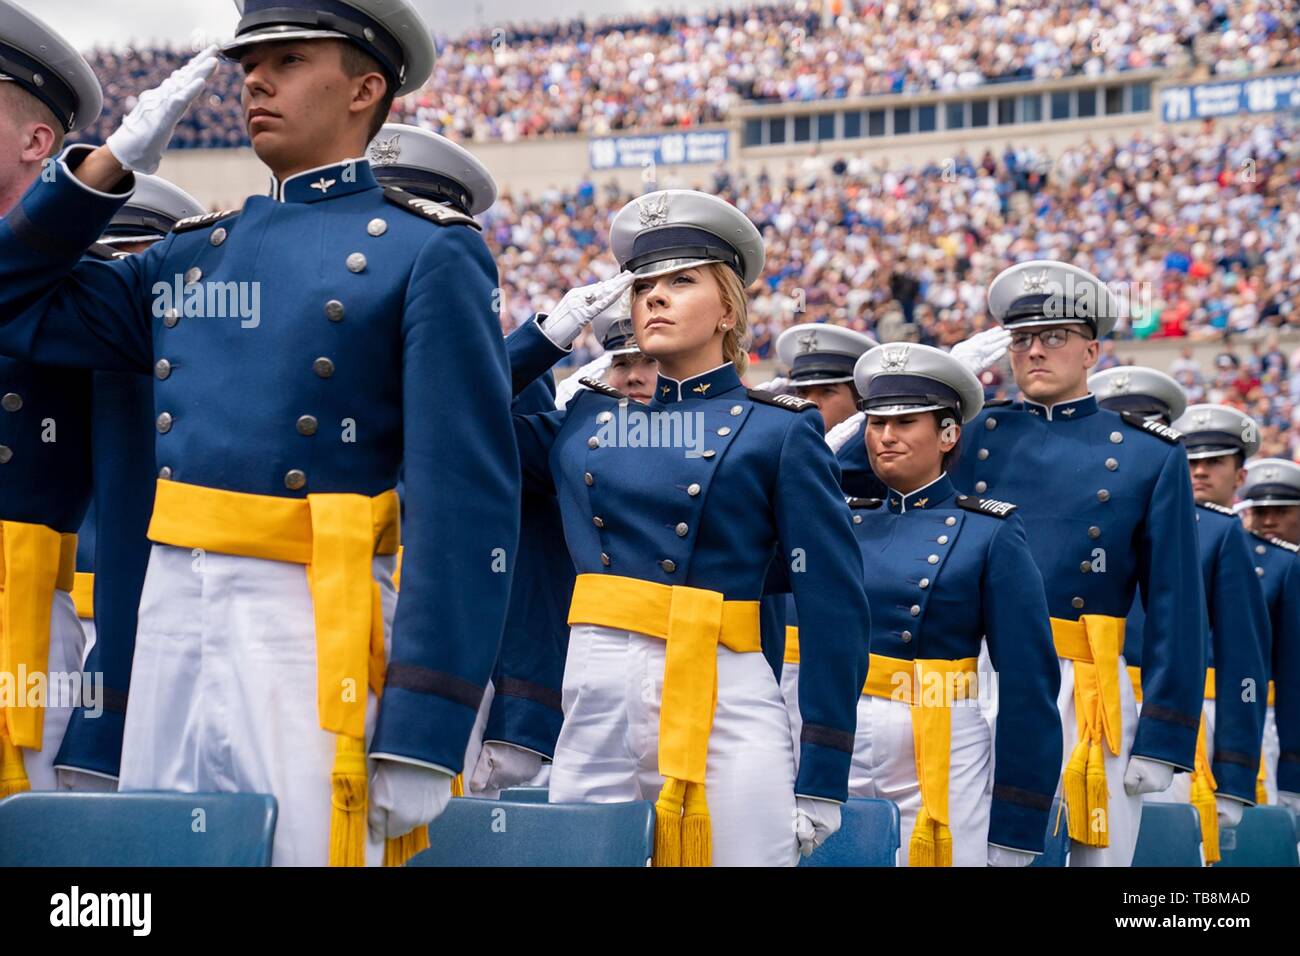 Colorado Springs, Colorado, USA. 30th May, 2019. U.S Air Force Academy cadets salute during the Graduation Ceremony at the USAF Academy Falcon Stadium May 30, 2019 in Colorado Springs, Colorado. Credit: Planetpix/Alamy Live News Stock Photo